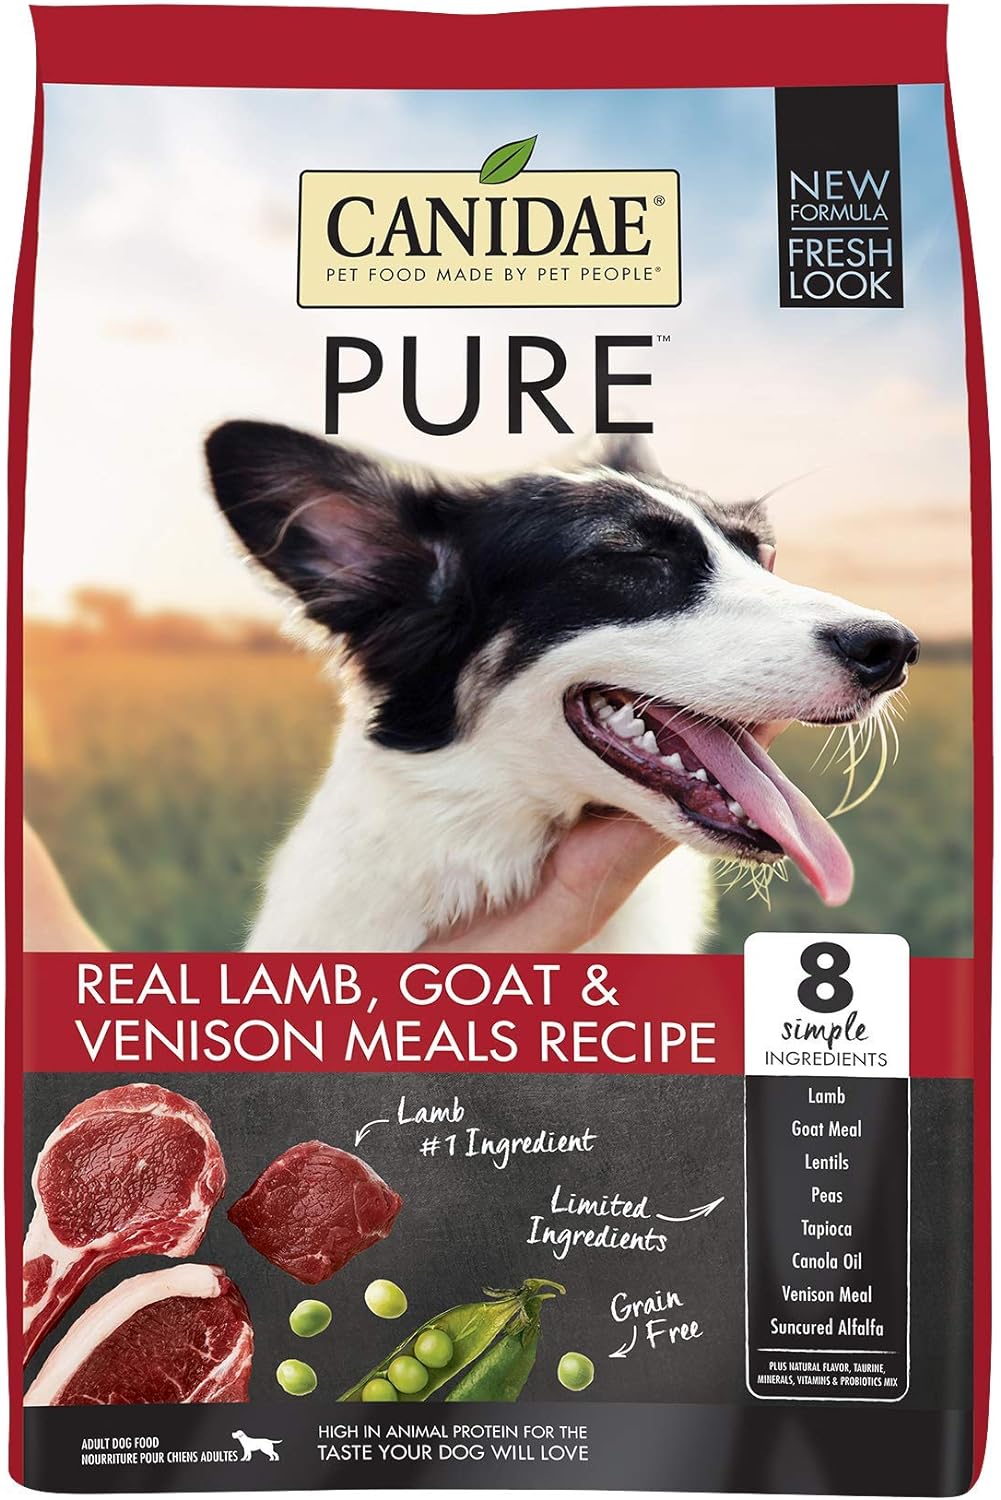 Canidae Pure Grain-Free Real Lamb, Goat & Venison Meals Recipe Dry Dog Food – Gallery Image 1